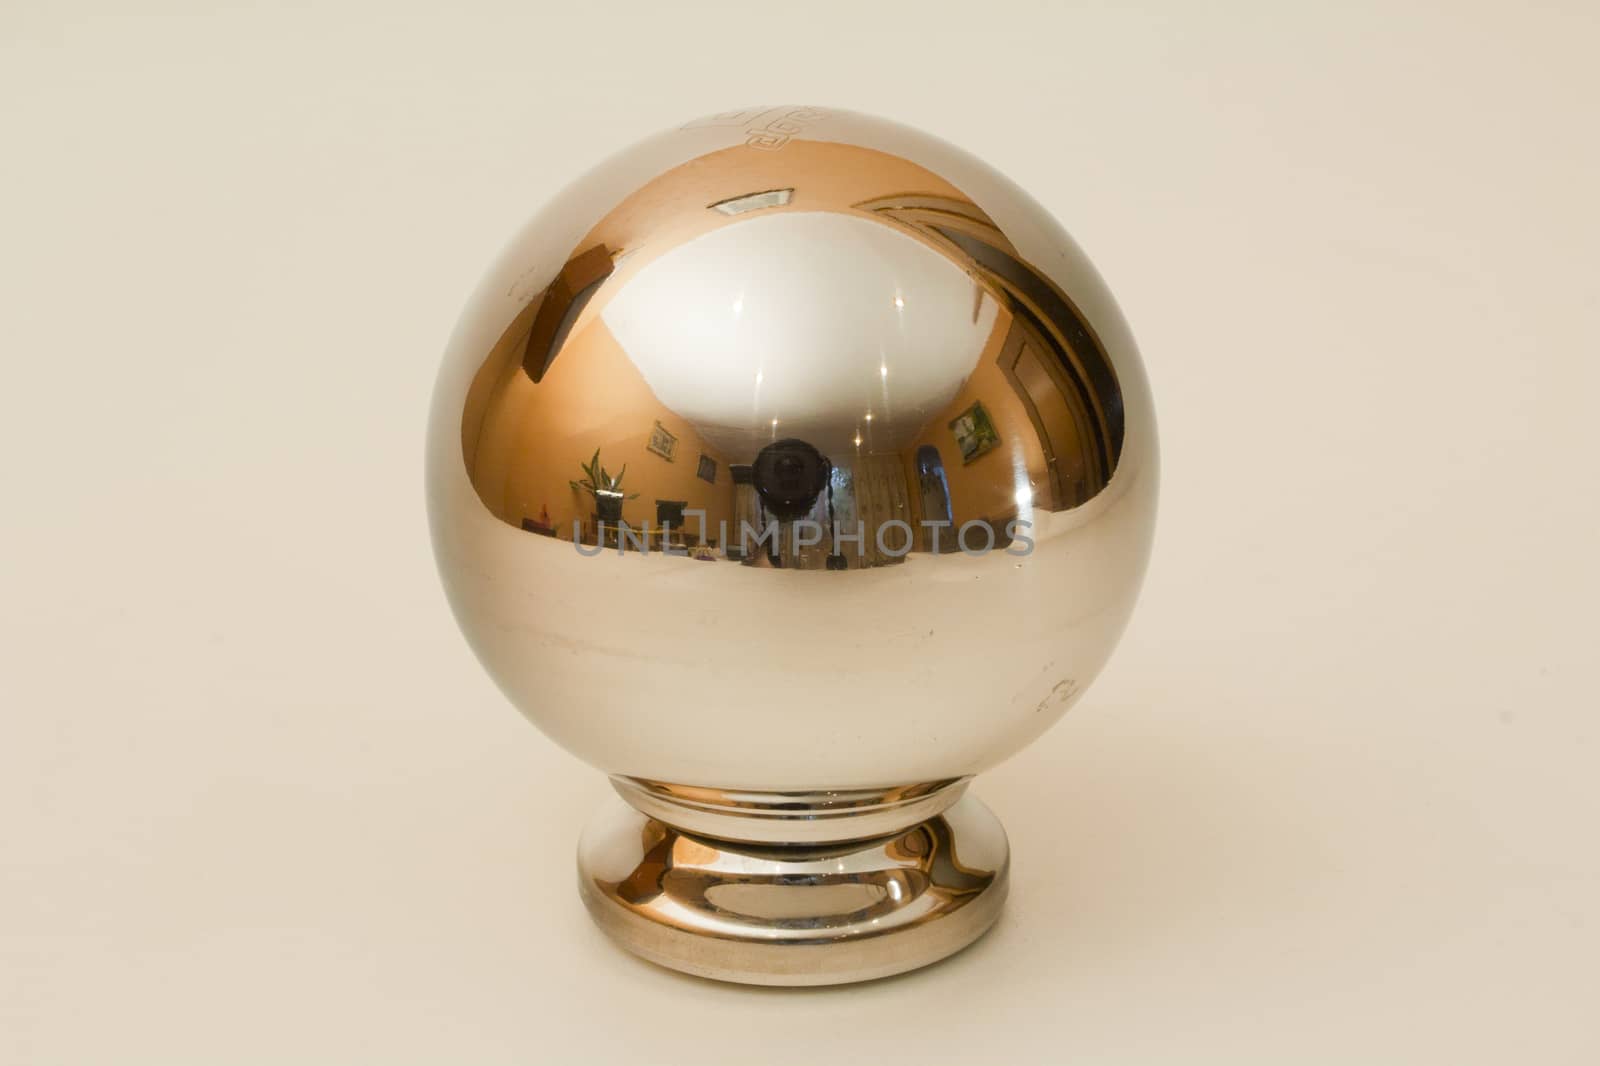 The ball is made of polished stainless steel